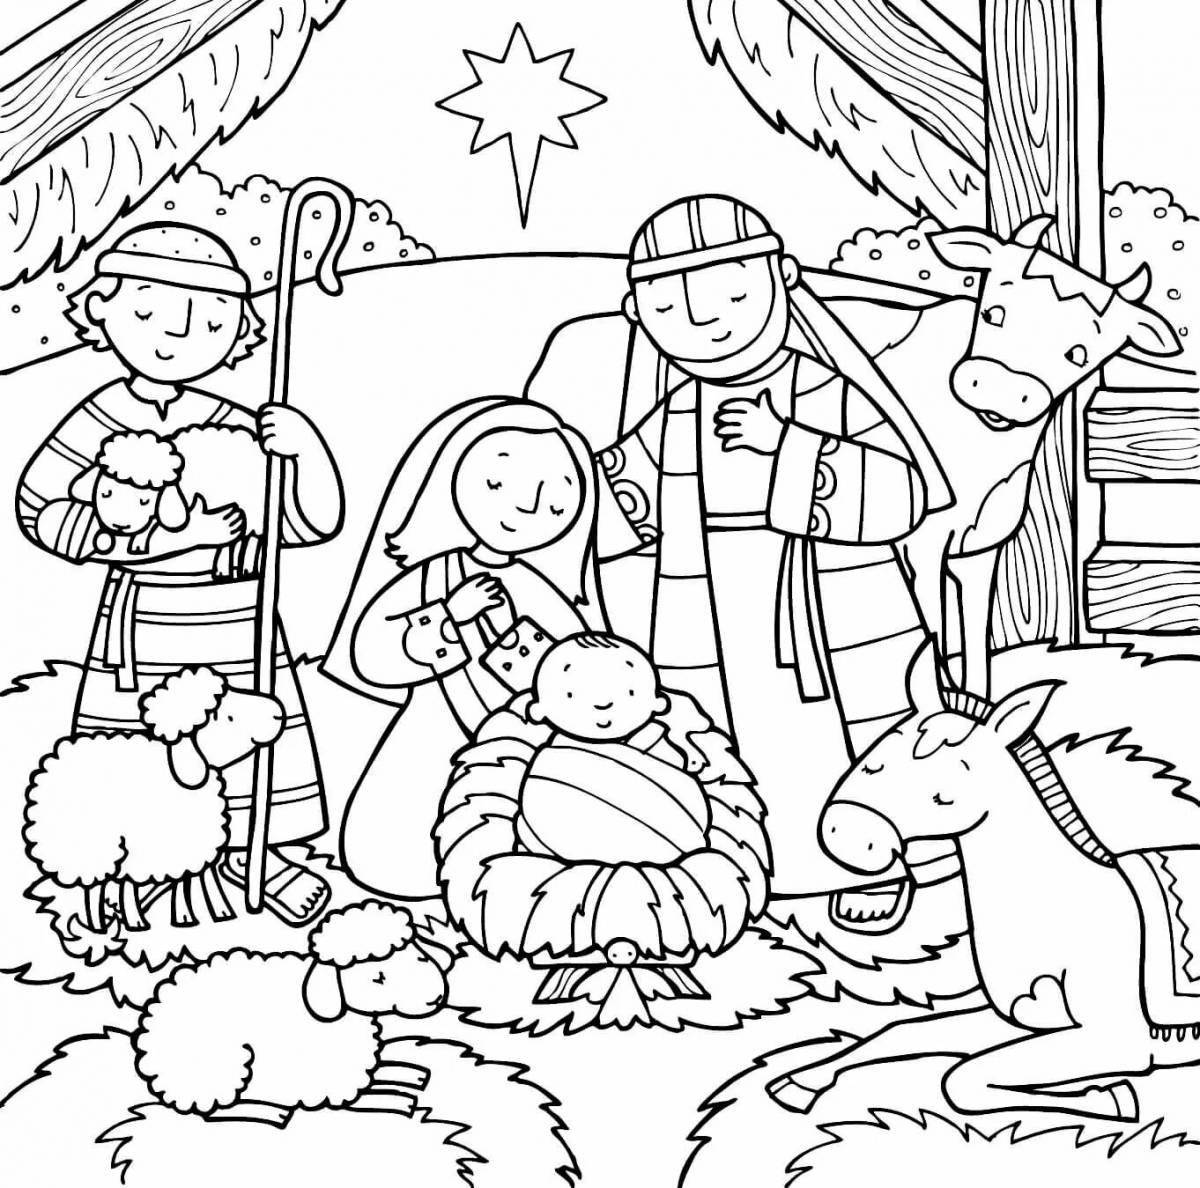 Christmas coloring playtime for children 5-6 years old